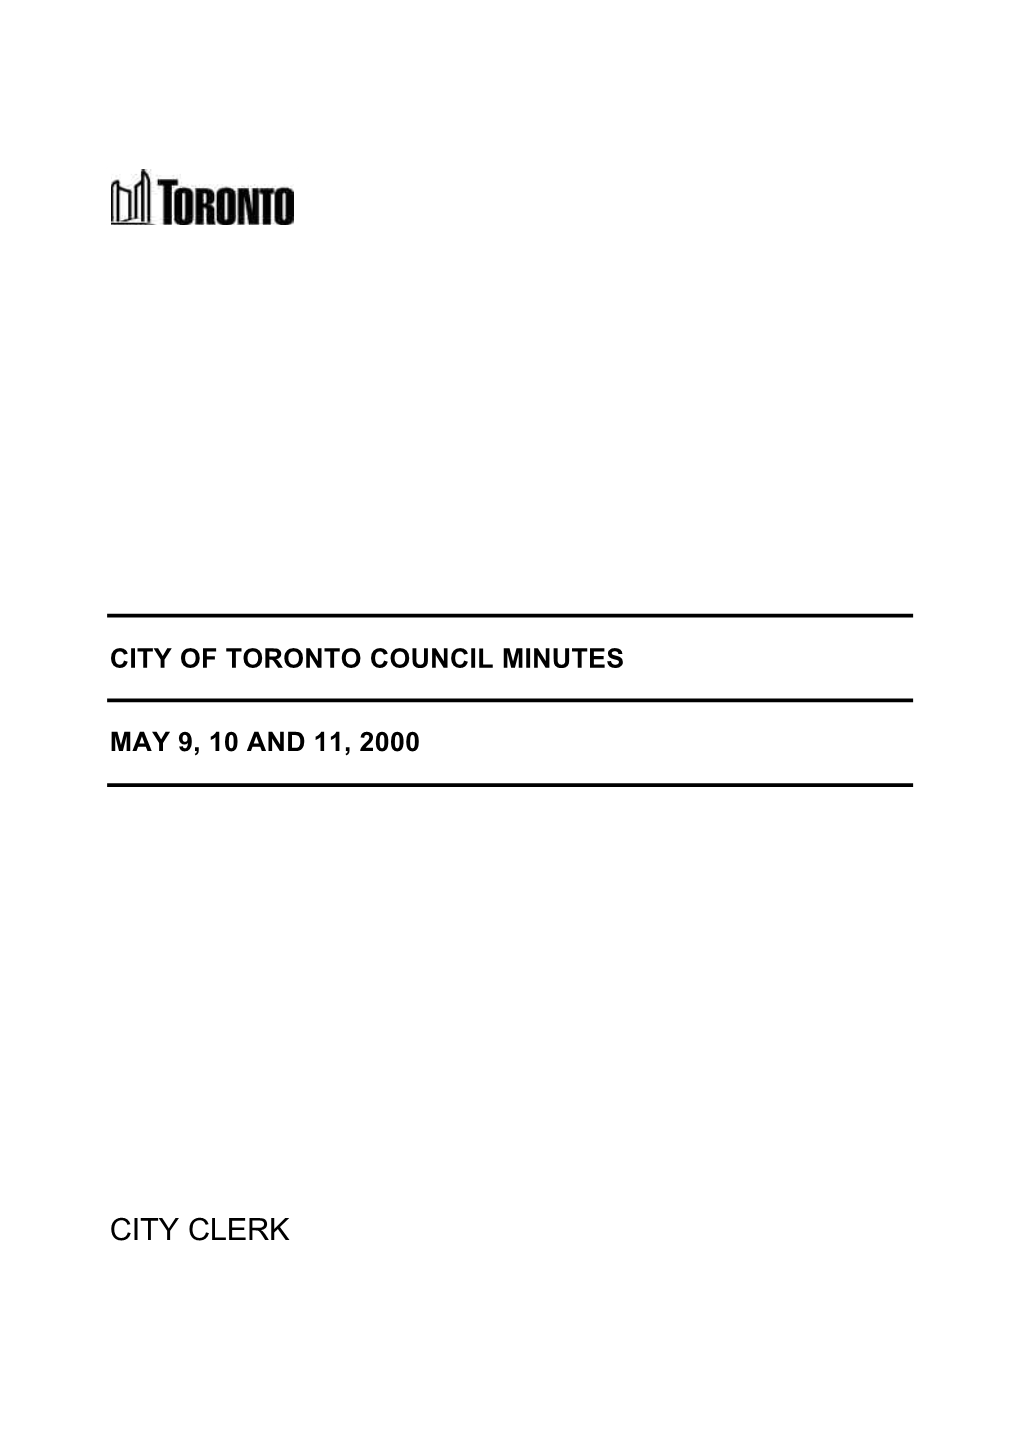 CITY CLERK Guide to the Council Minutes